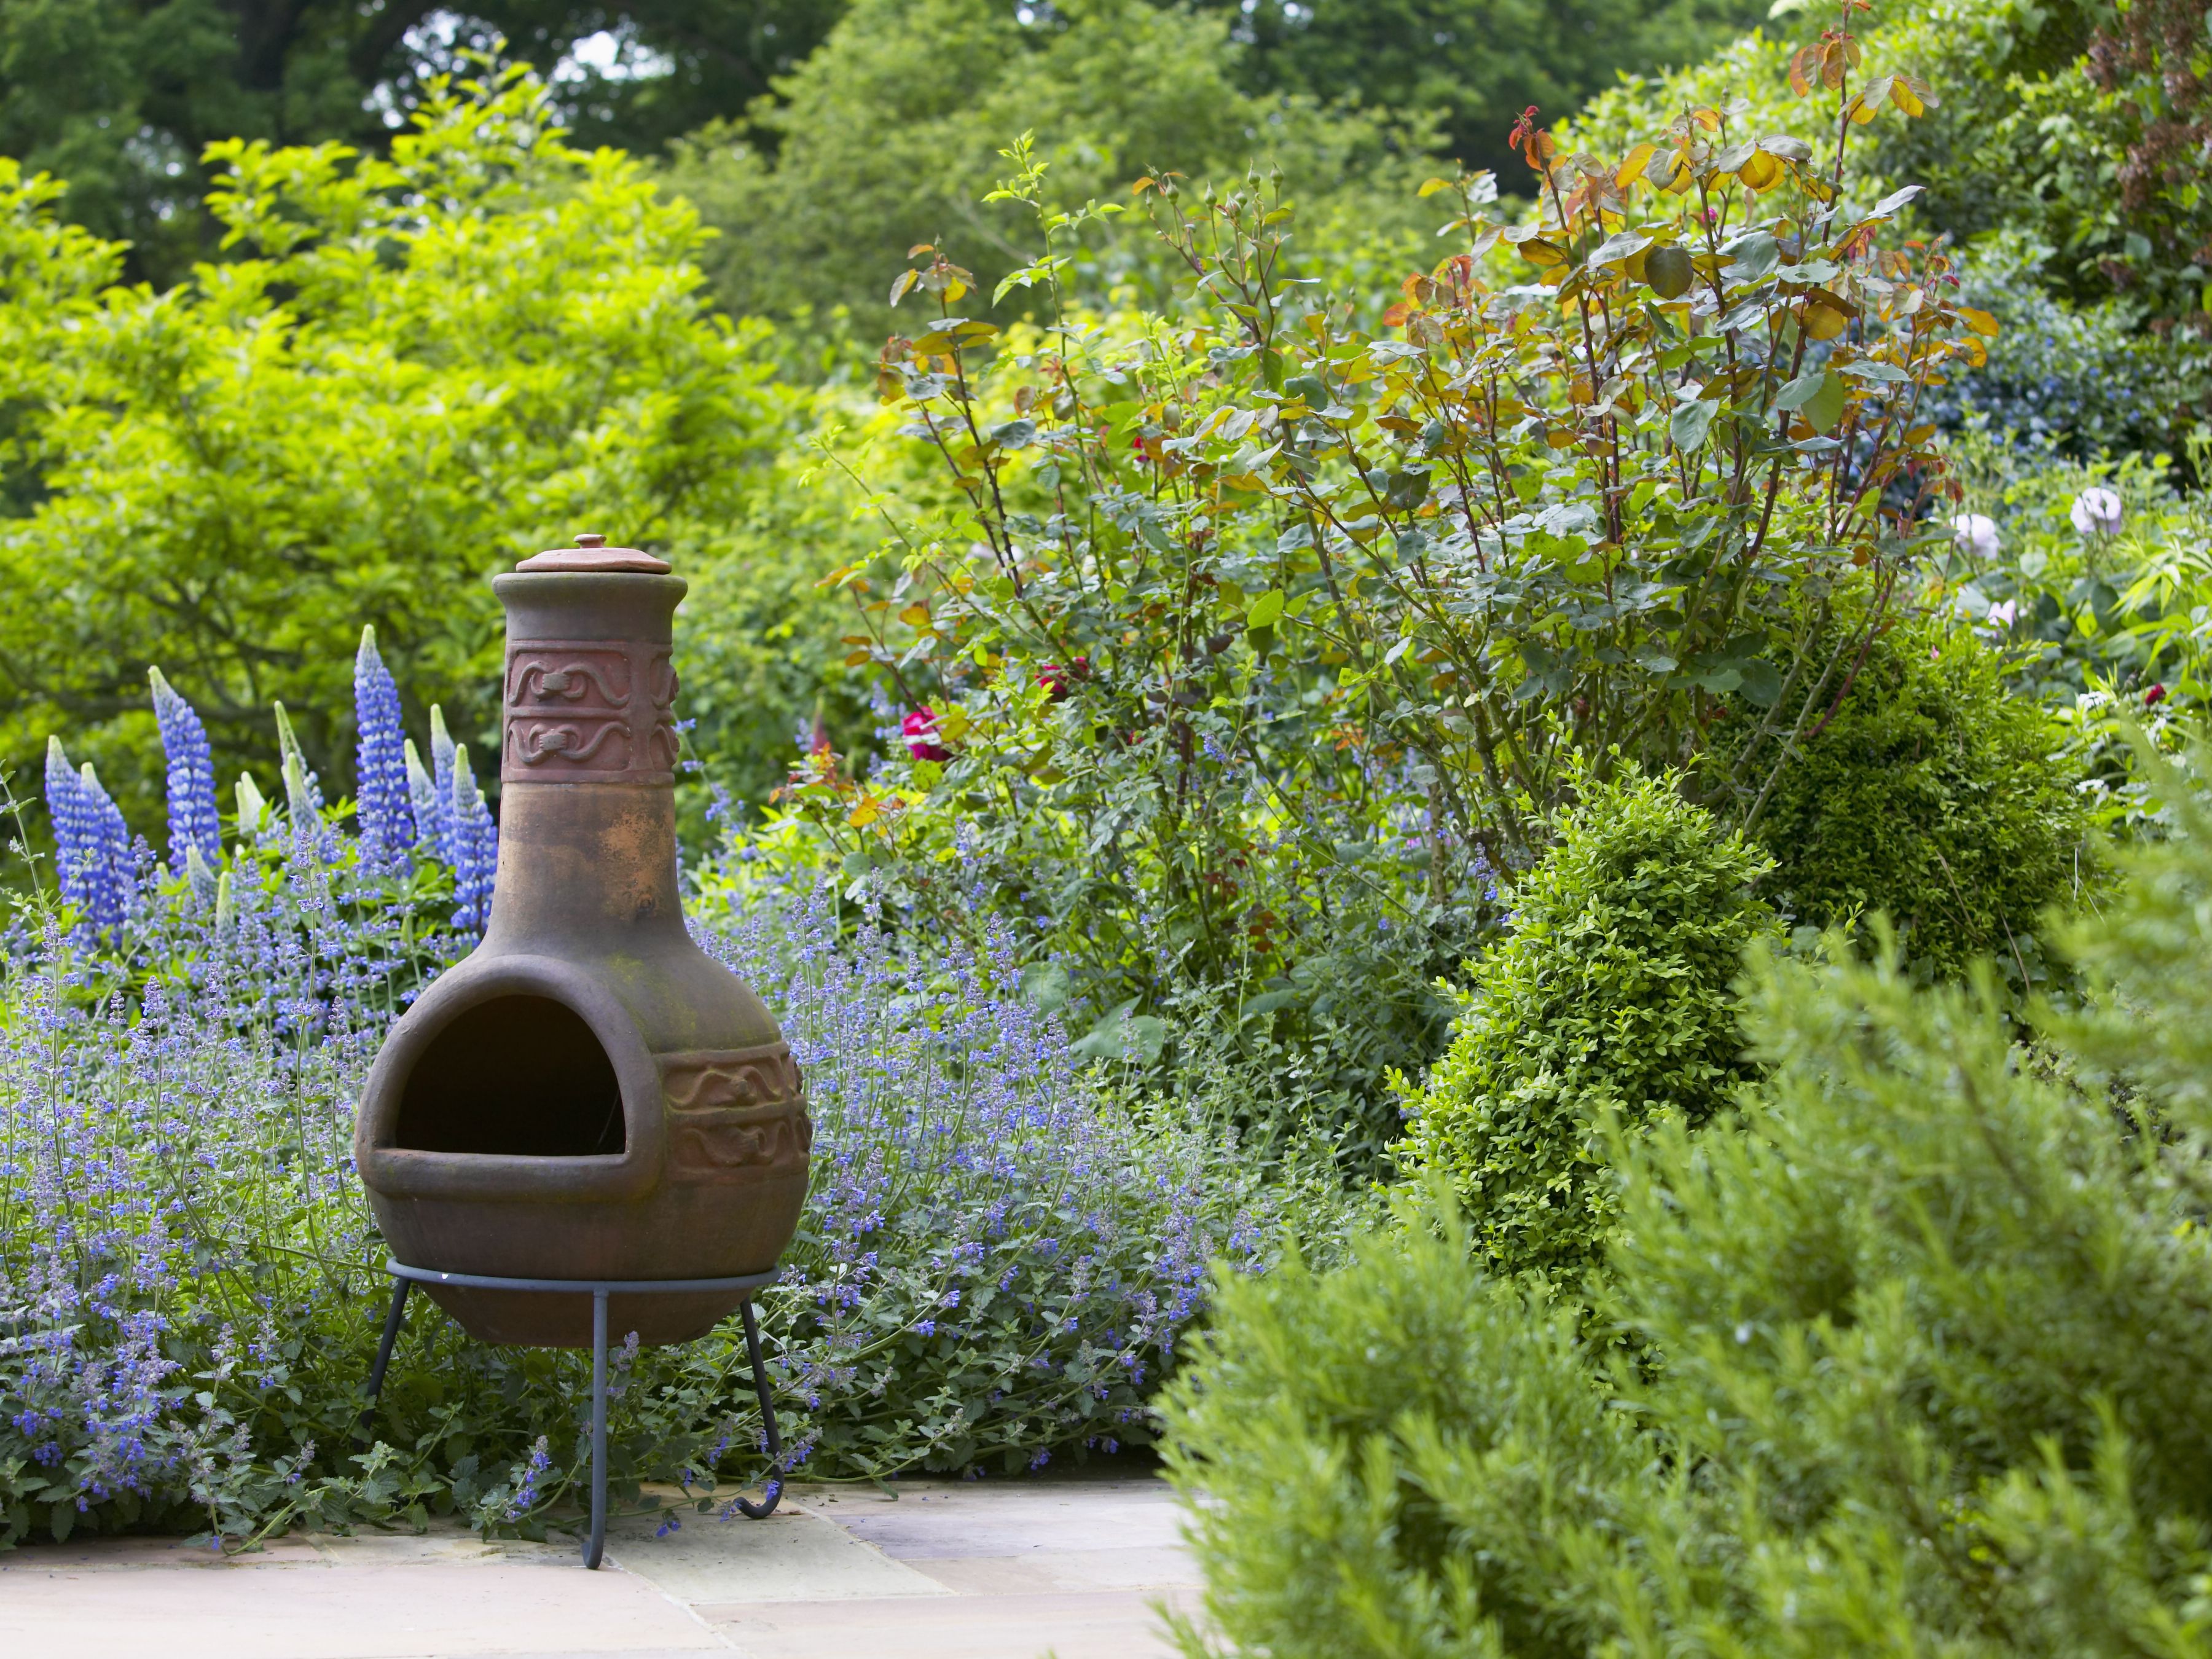 Chiminea Clay Outdoor Fireplace Best Of What is A Chiminea Outdoor Fireplaces and Fire Pits